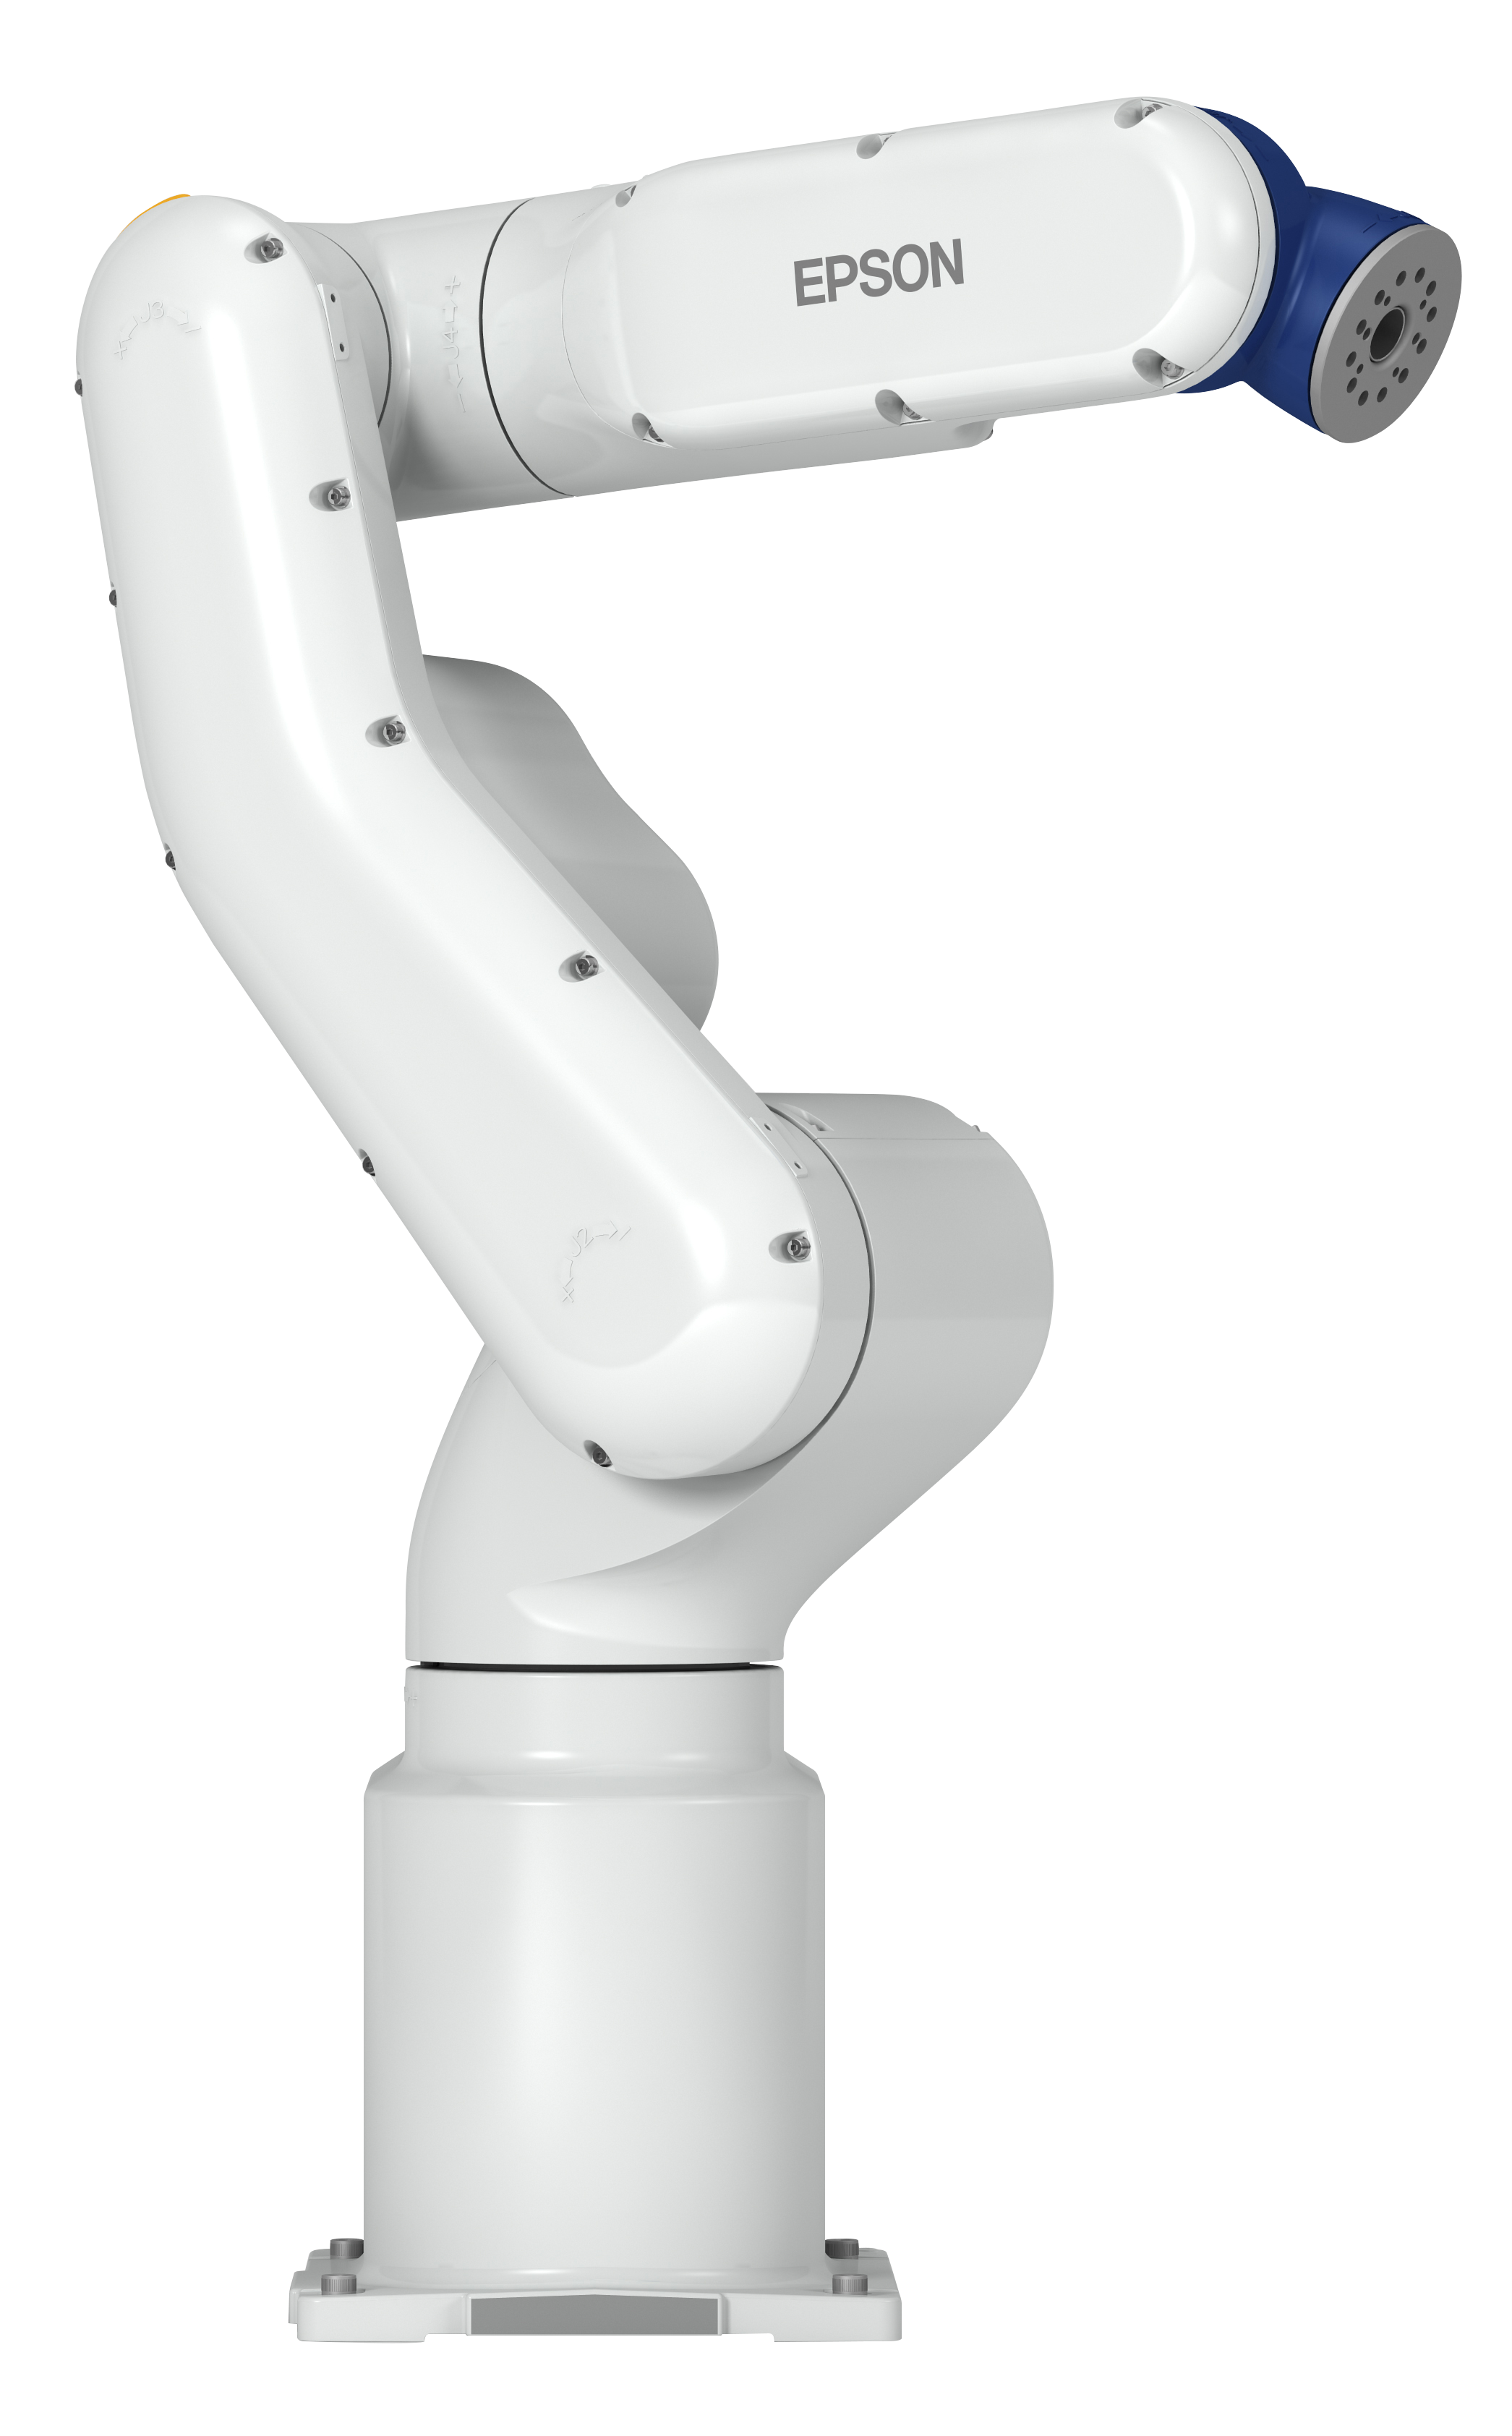 Schneider & Company - A modern epson industrial robotic arm designed for precision automation tasks on a white background.